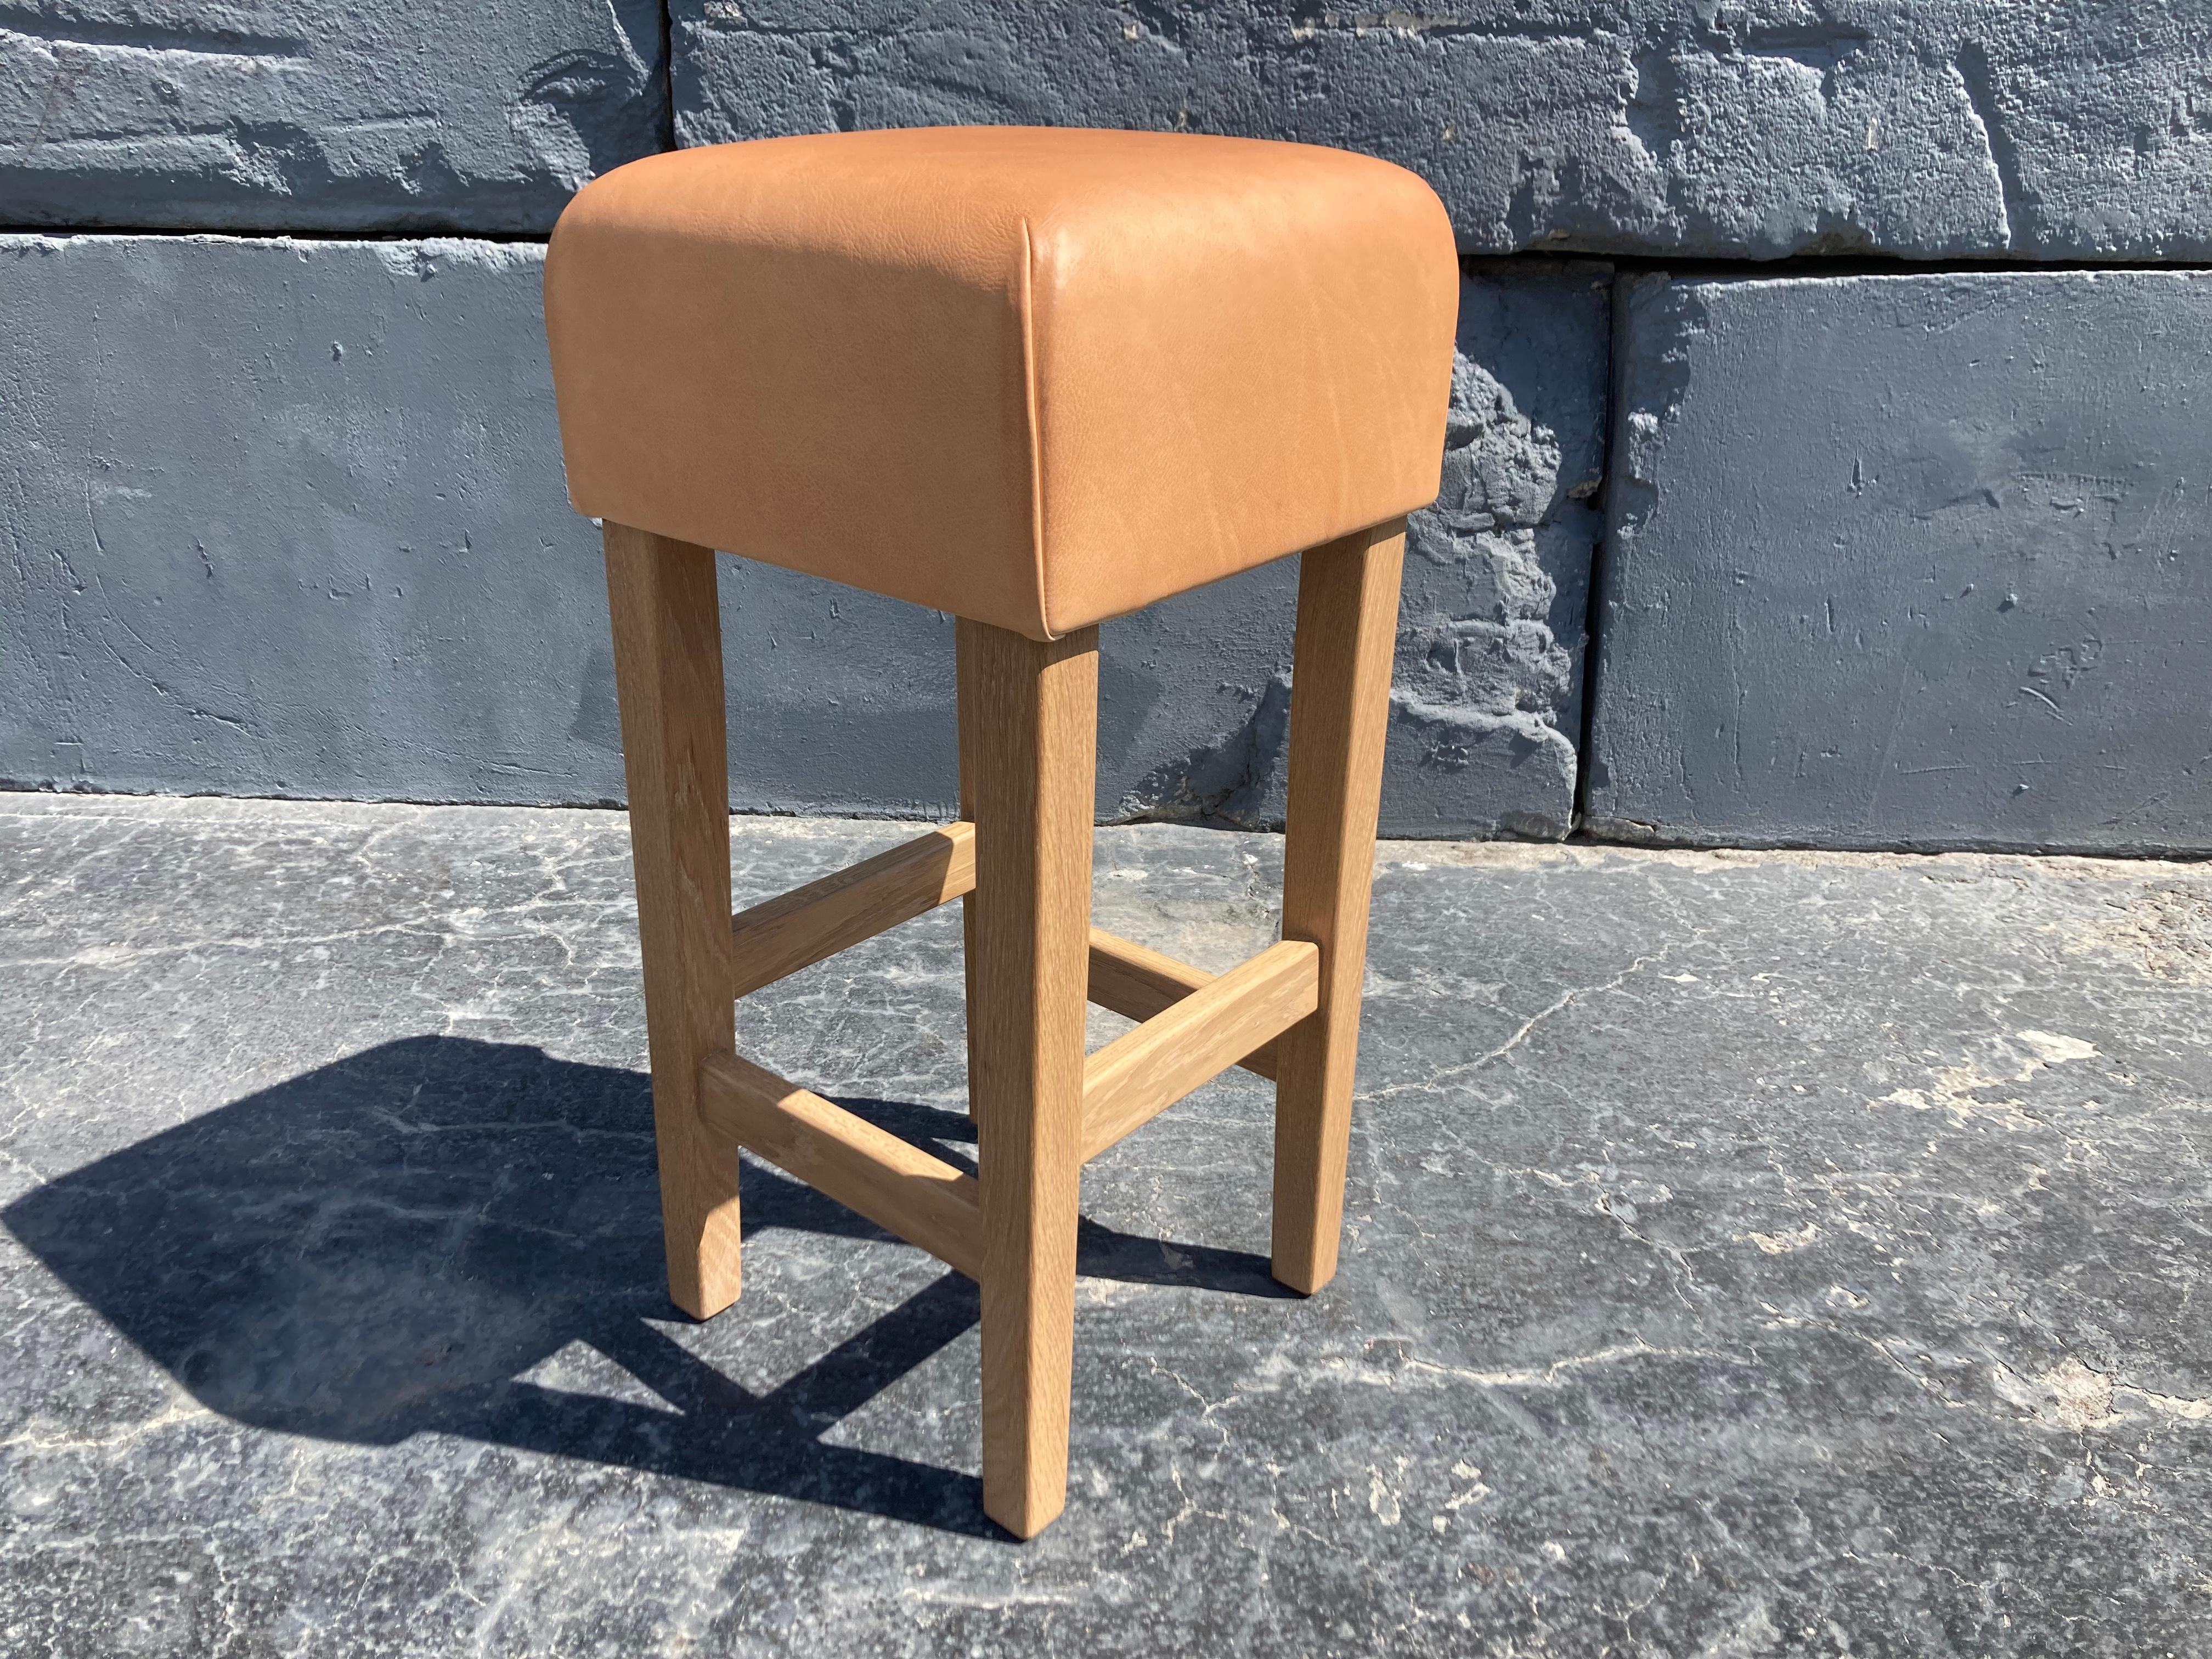 Beautiful barstools, pickled white oak base with clear lacquer finish and a vegetable tanned leather seat. The first picture shows a stool where the leather has aged, please see other pictures for current production. The Leather is very thick and